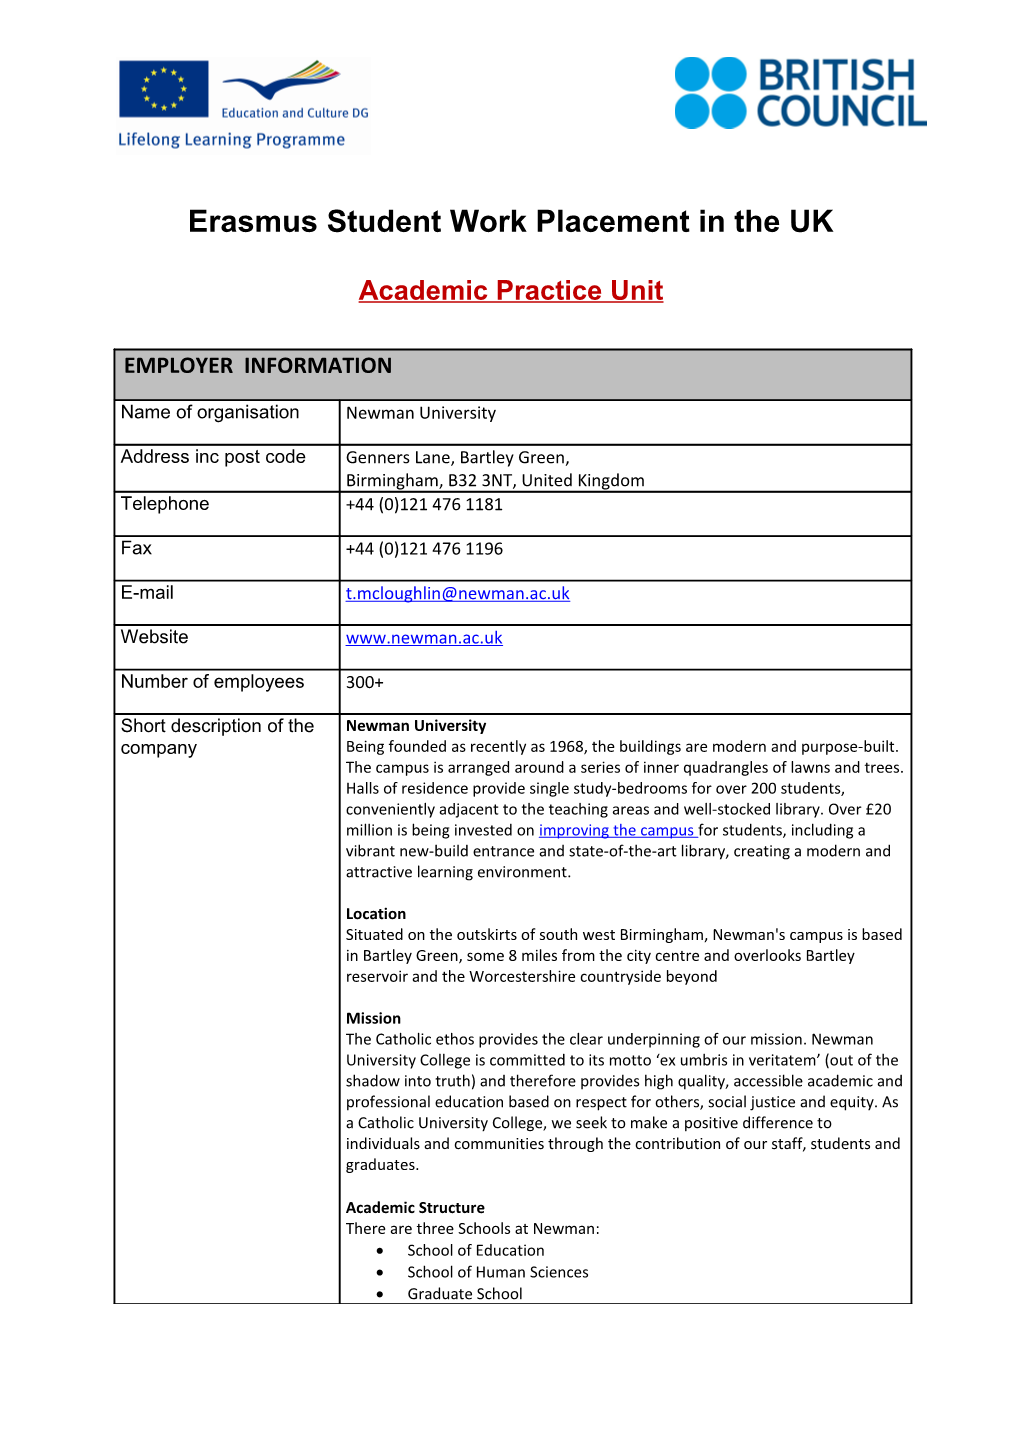 Erasmus Student Work Placement in the UK s11